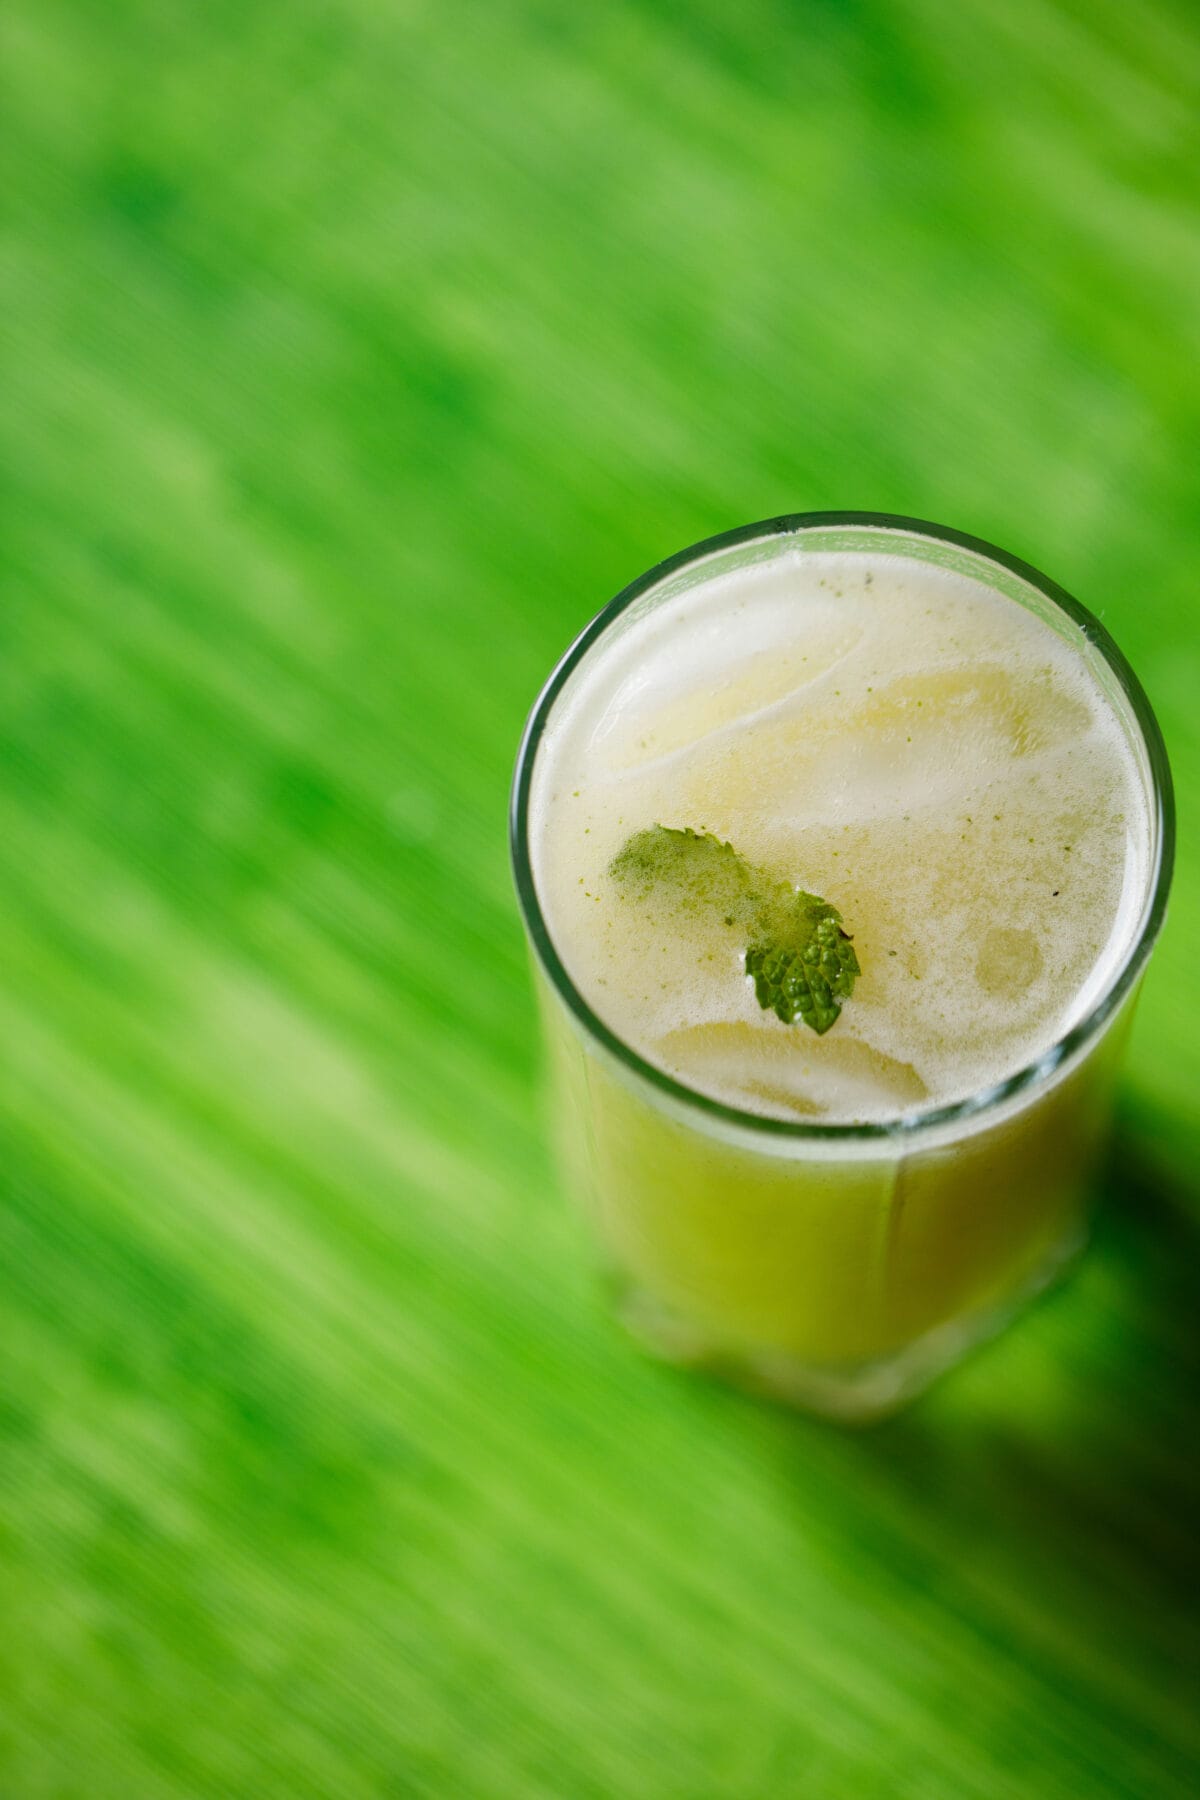 roasted aam panna in a glass on a green table.